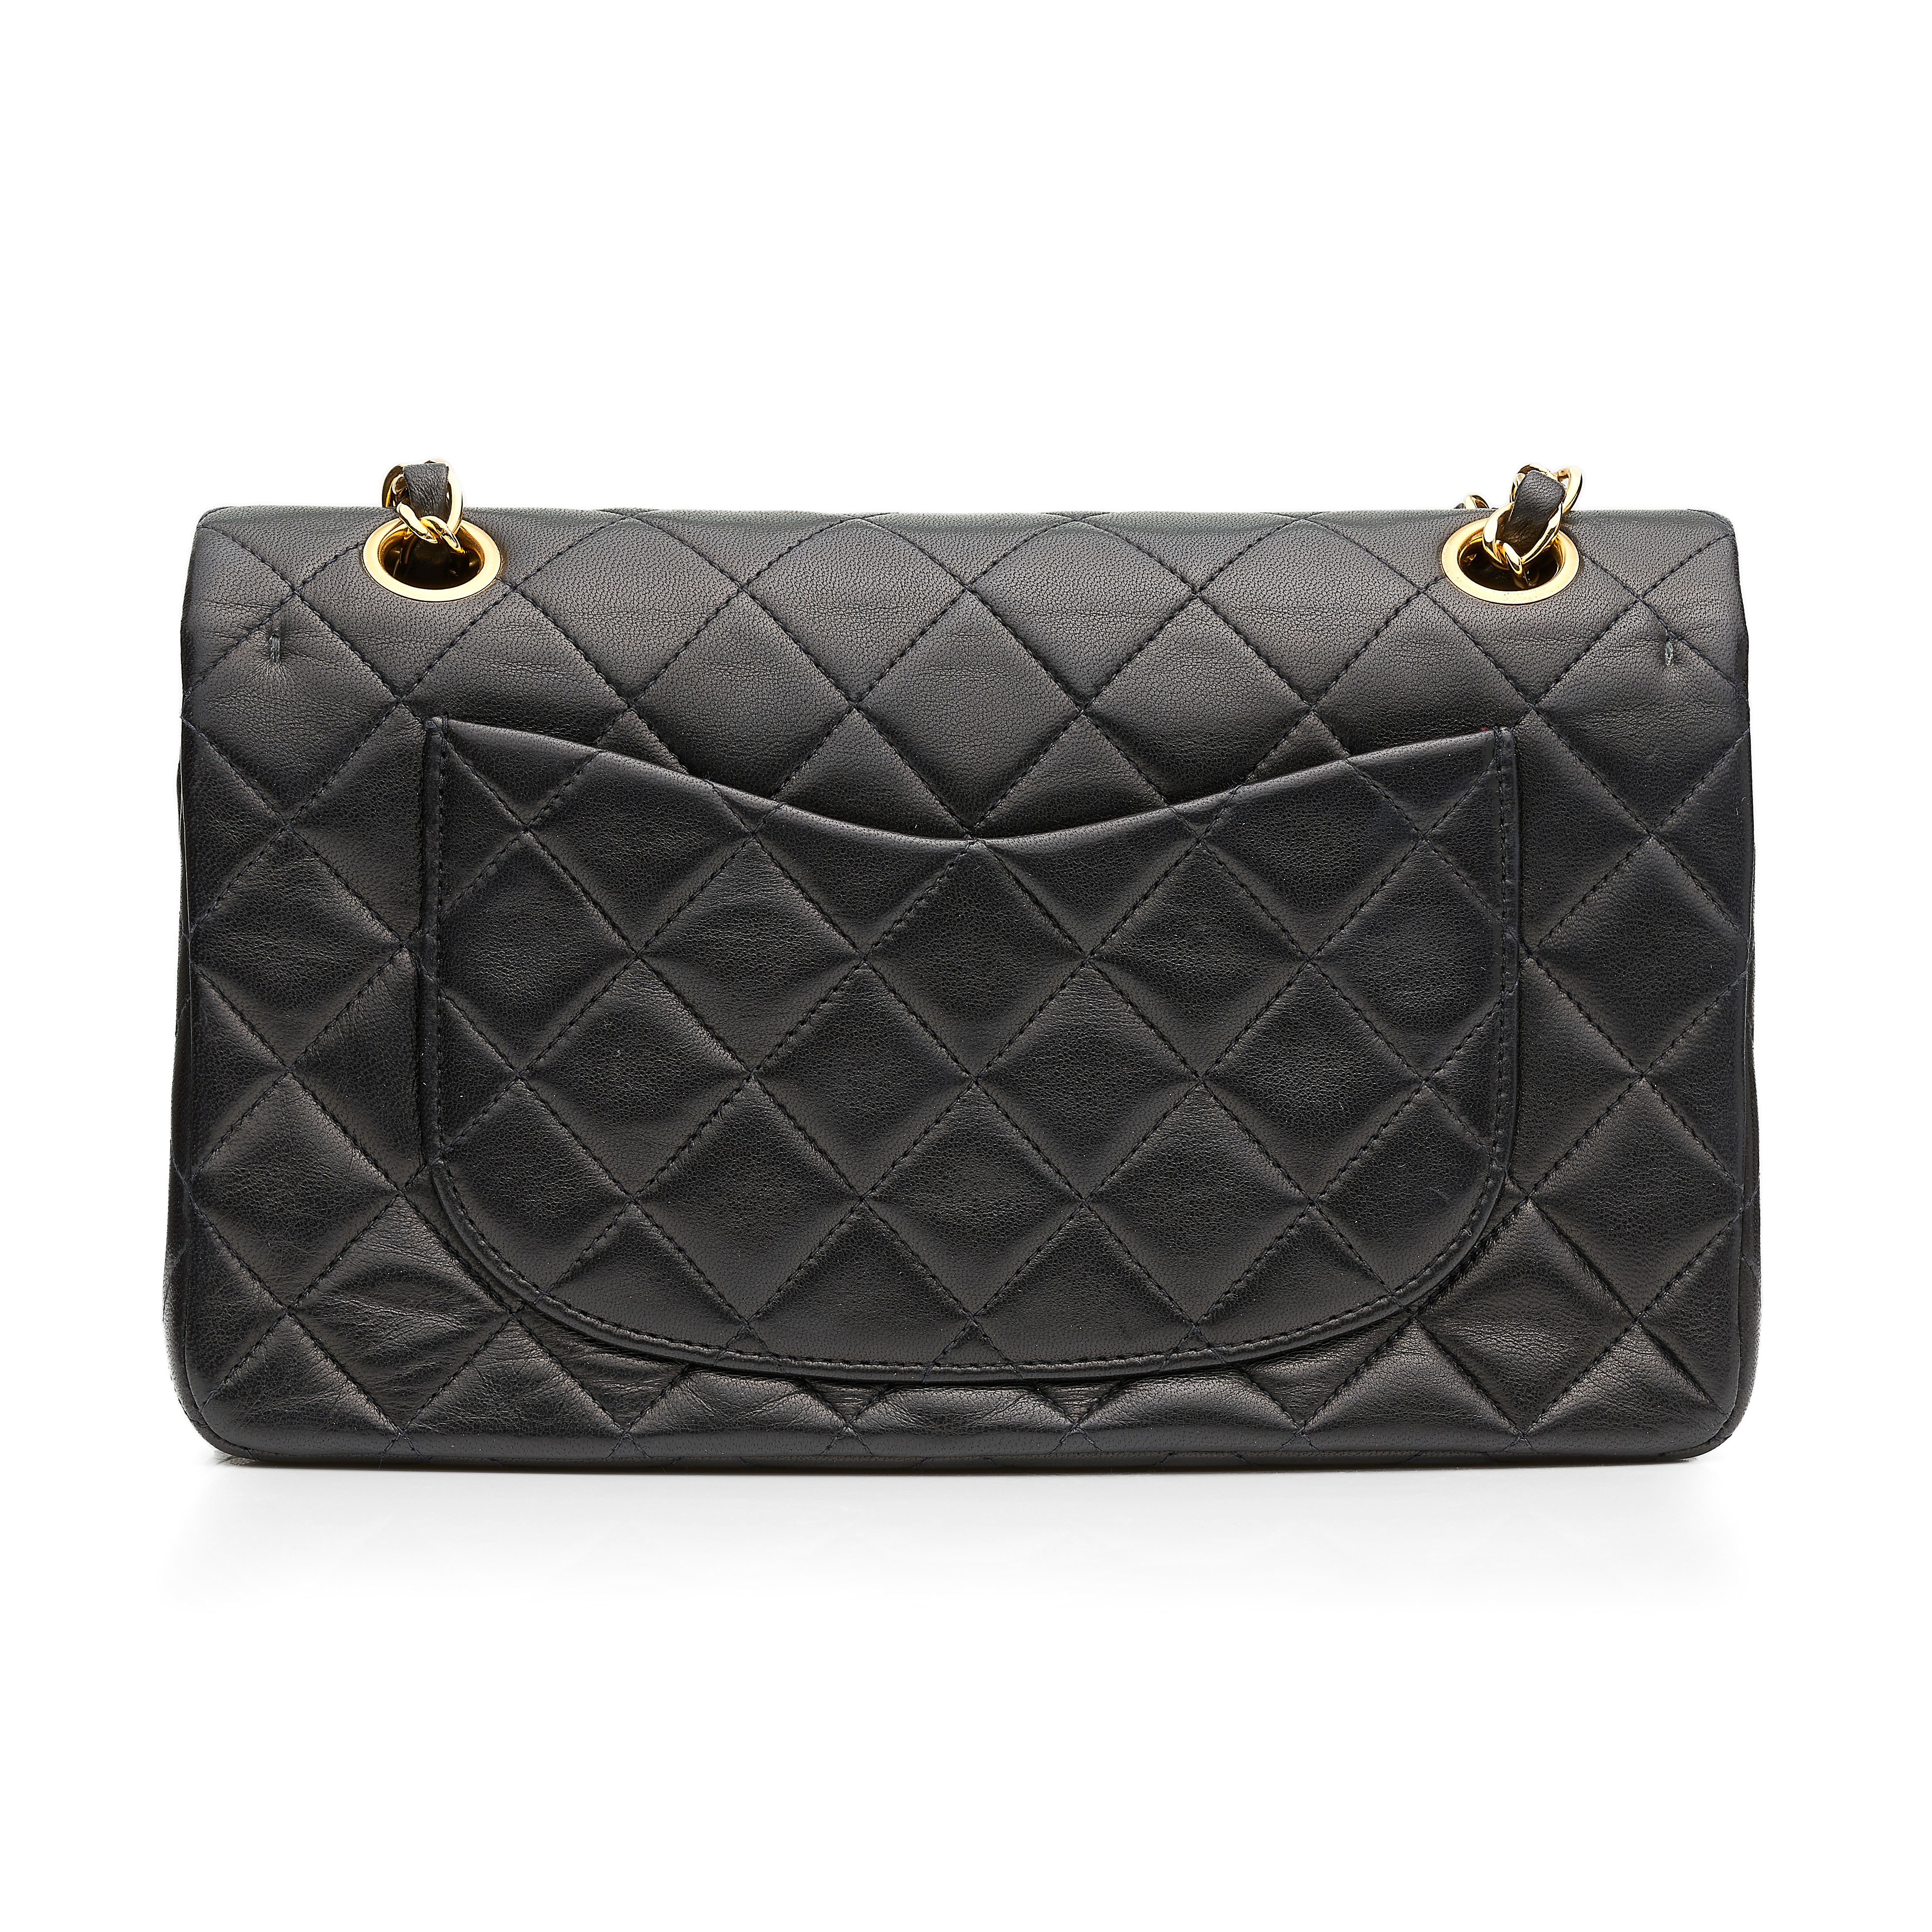 CHANEL, A VINTAGE MINI DOUBLE FLAP BAG quilted black lamb leather, gold tone hardware, red leather - Image 3 of 4